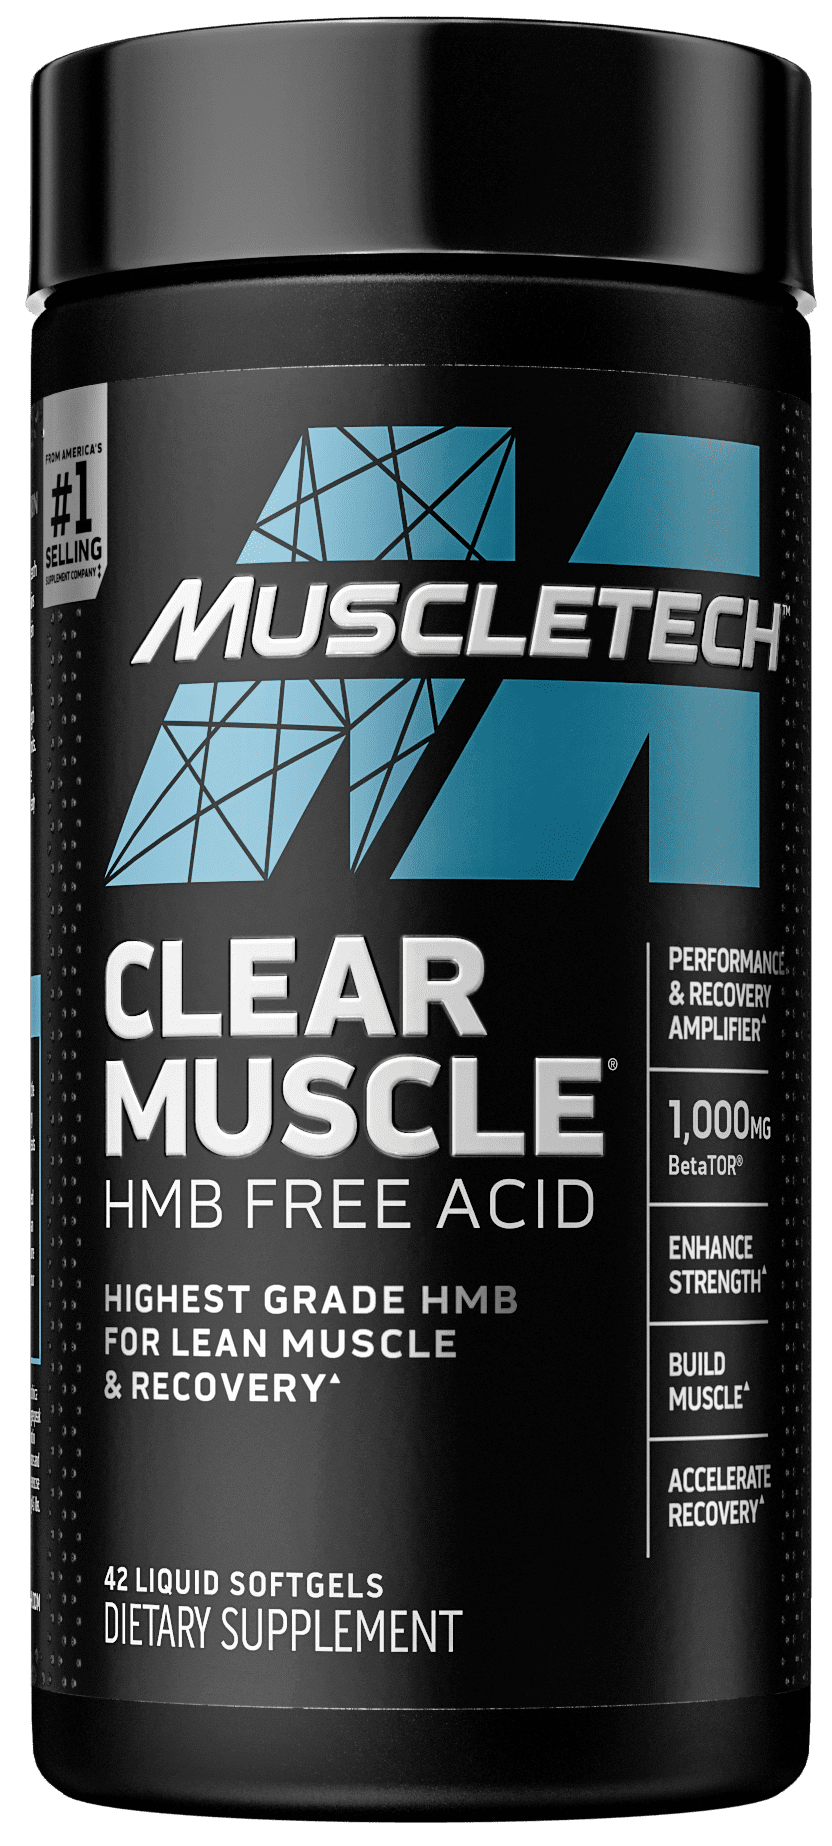 Muscletech Clear Muscle Post-Workout with HMB to Build Muscle, 42 Capsules